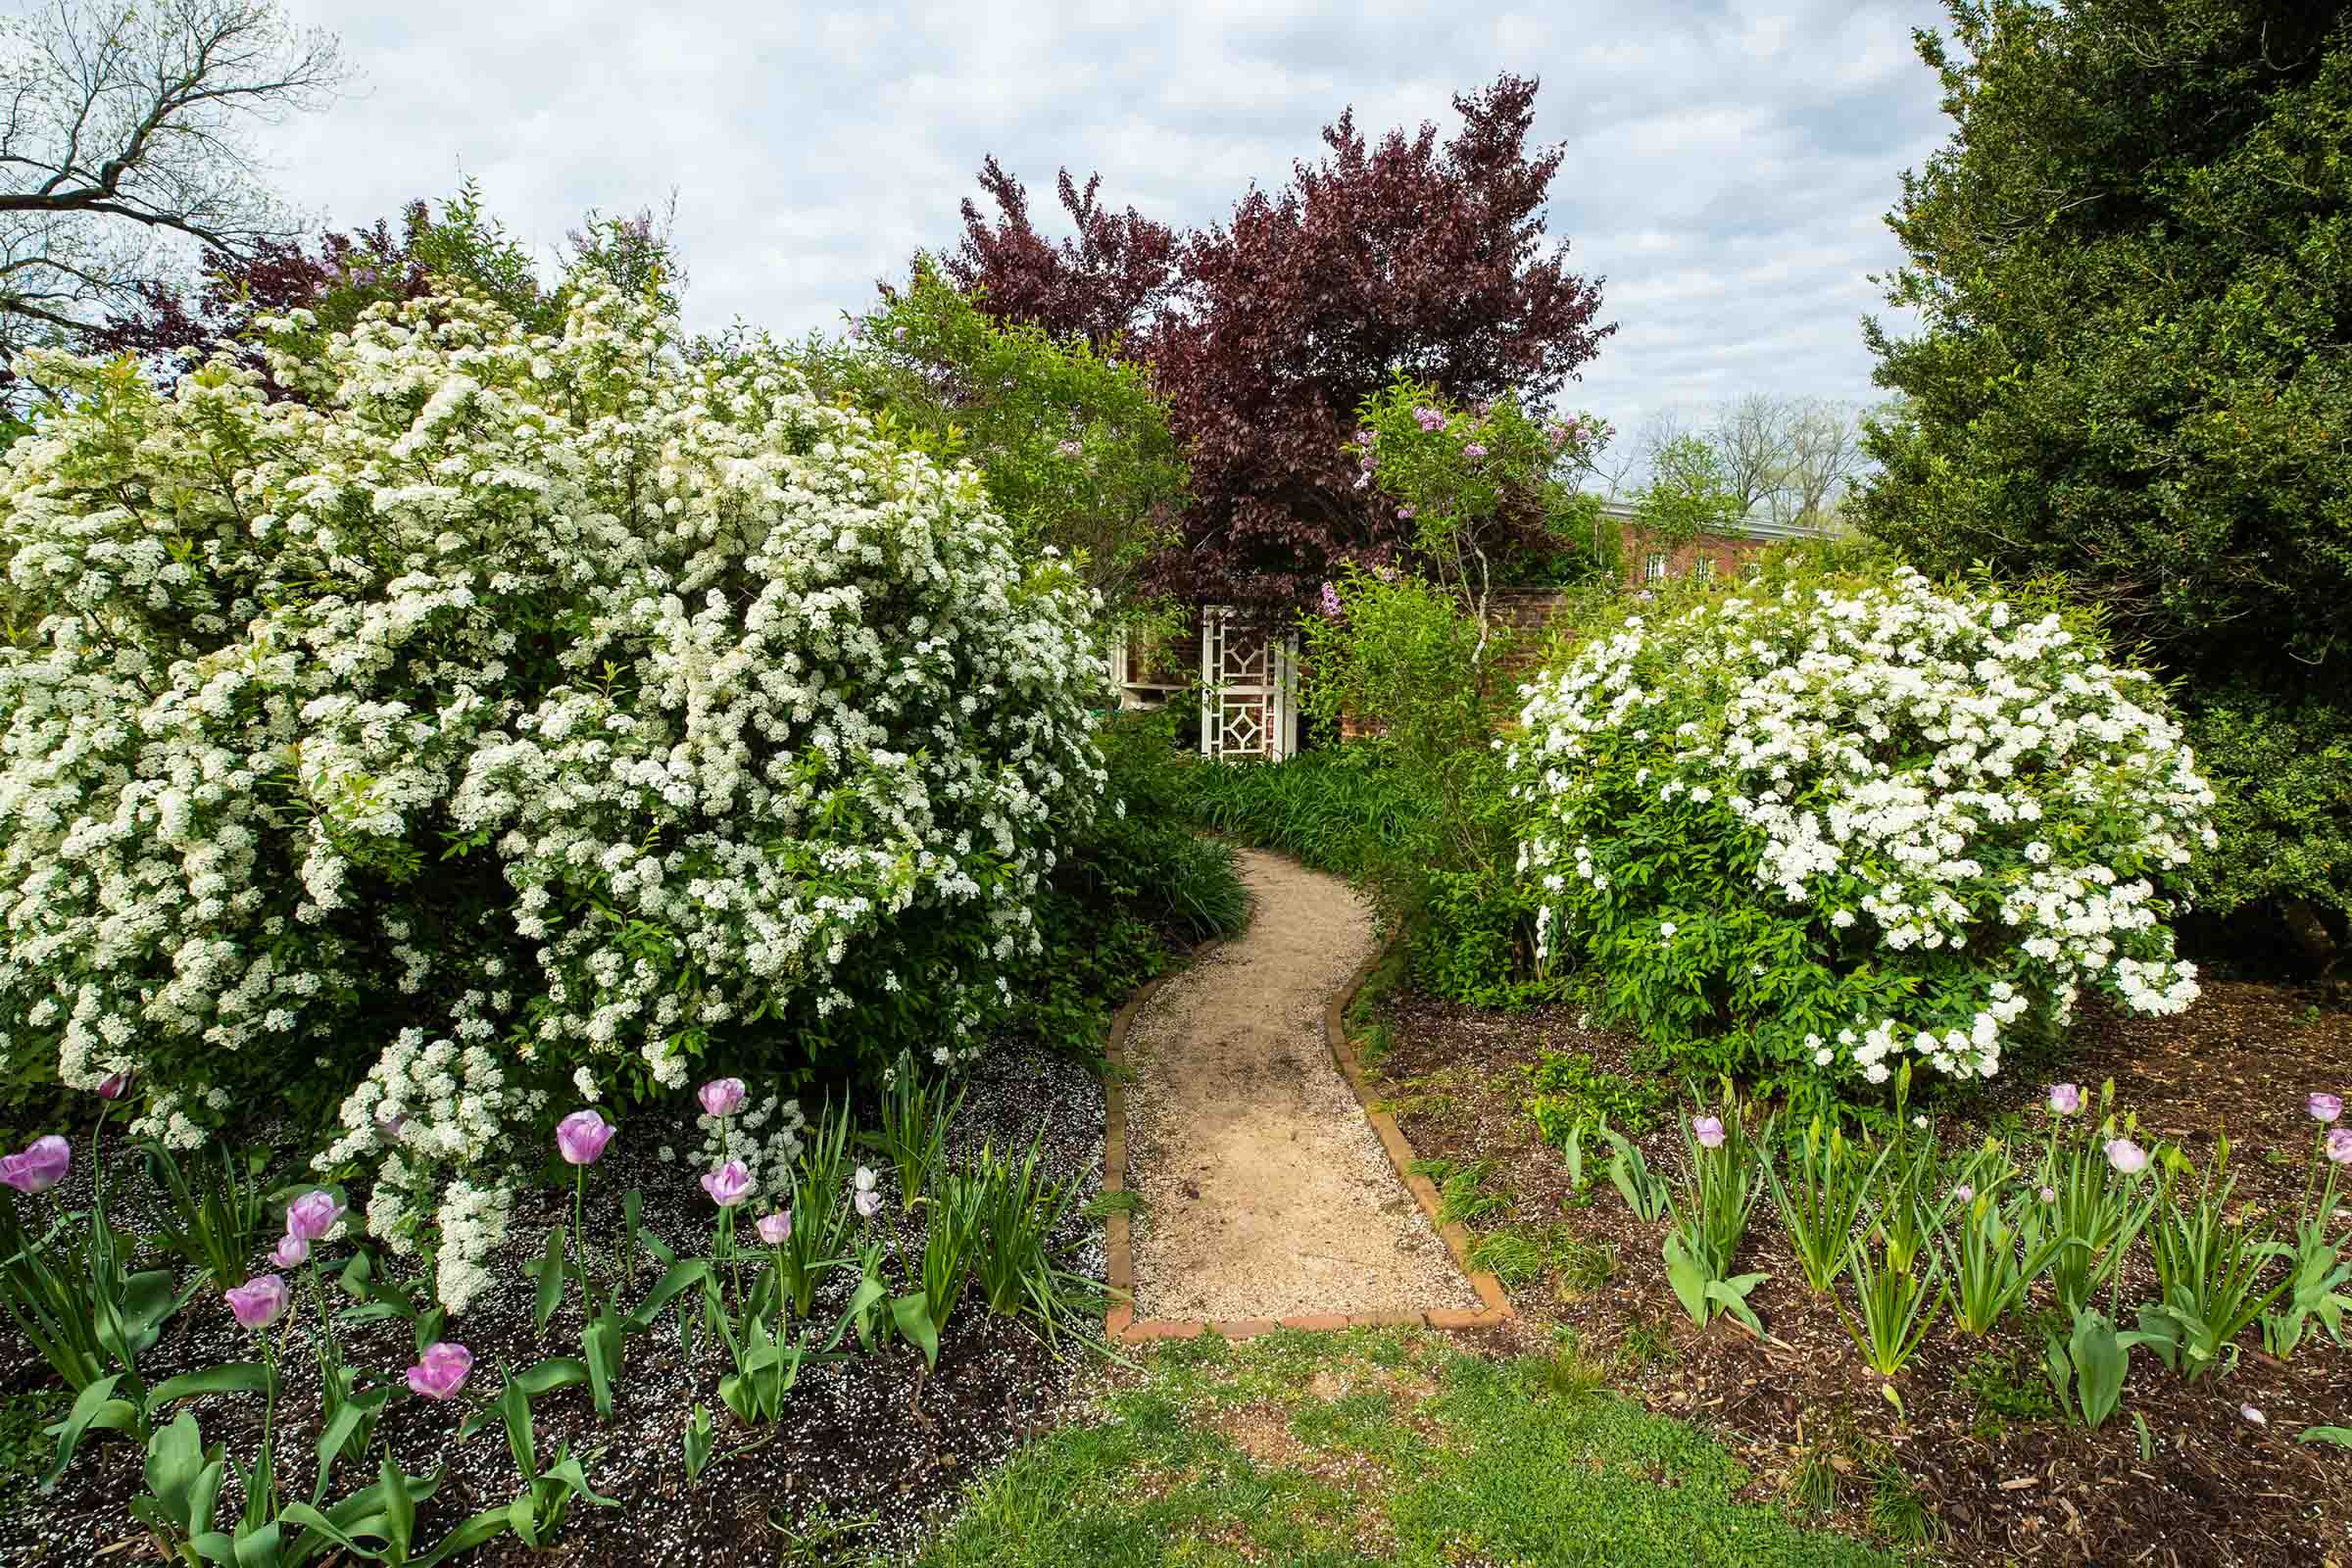 Pea rock pathway surrounded by flowering trees and bushes